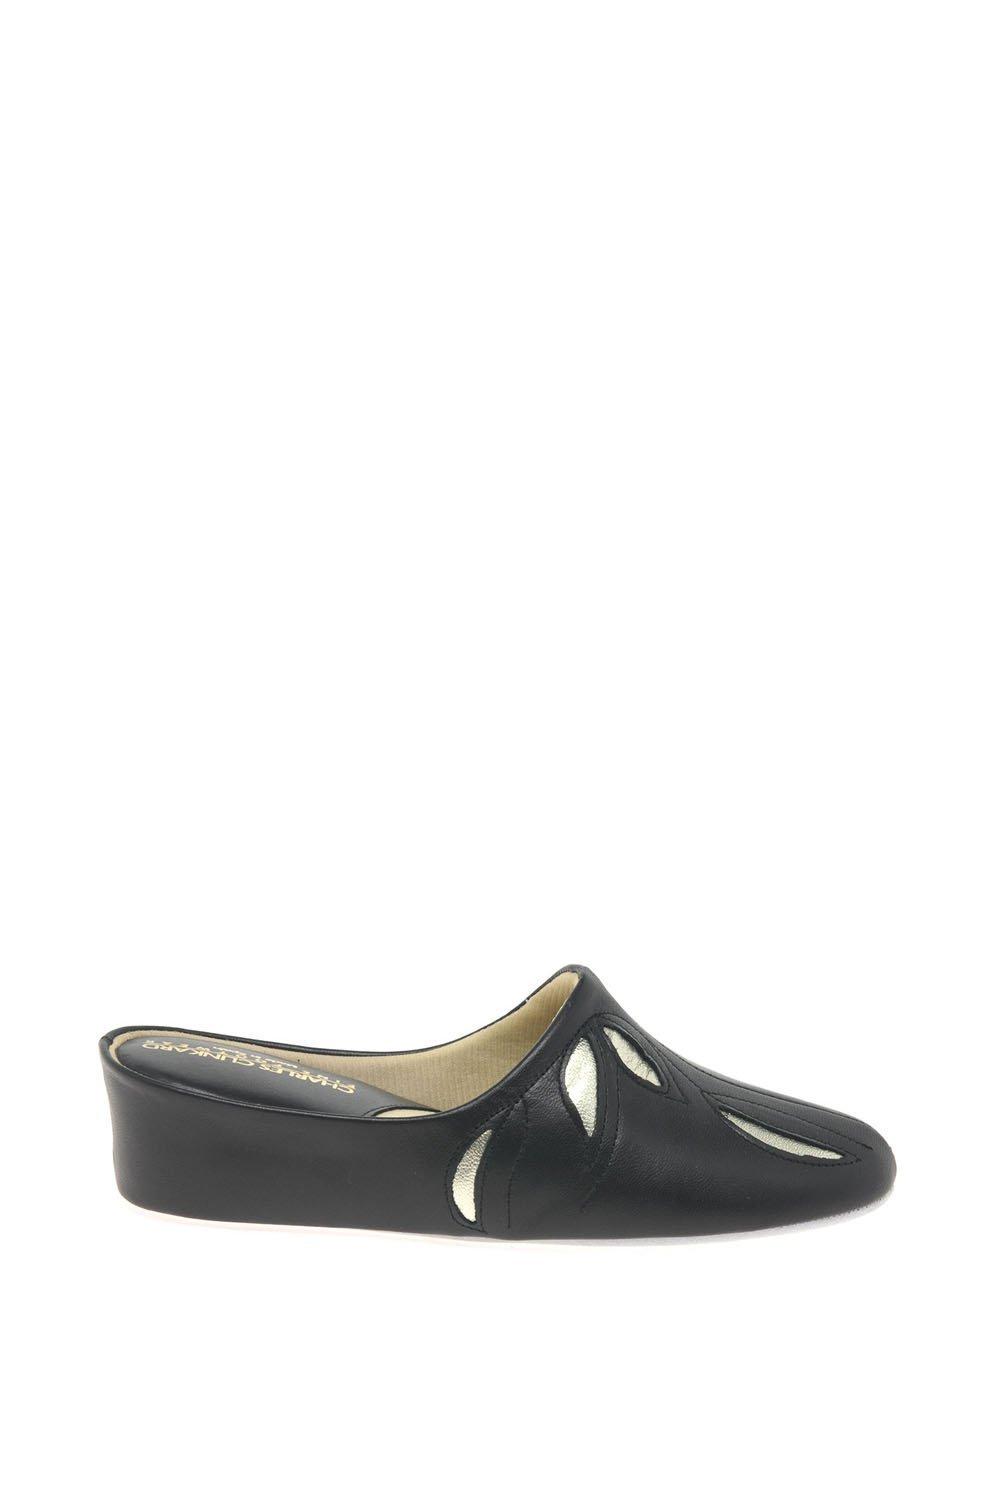 Charles Clinkard Women's 'Molly' Leather Slippers|Size: 7|black